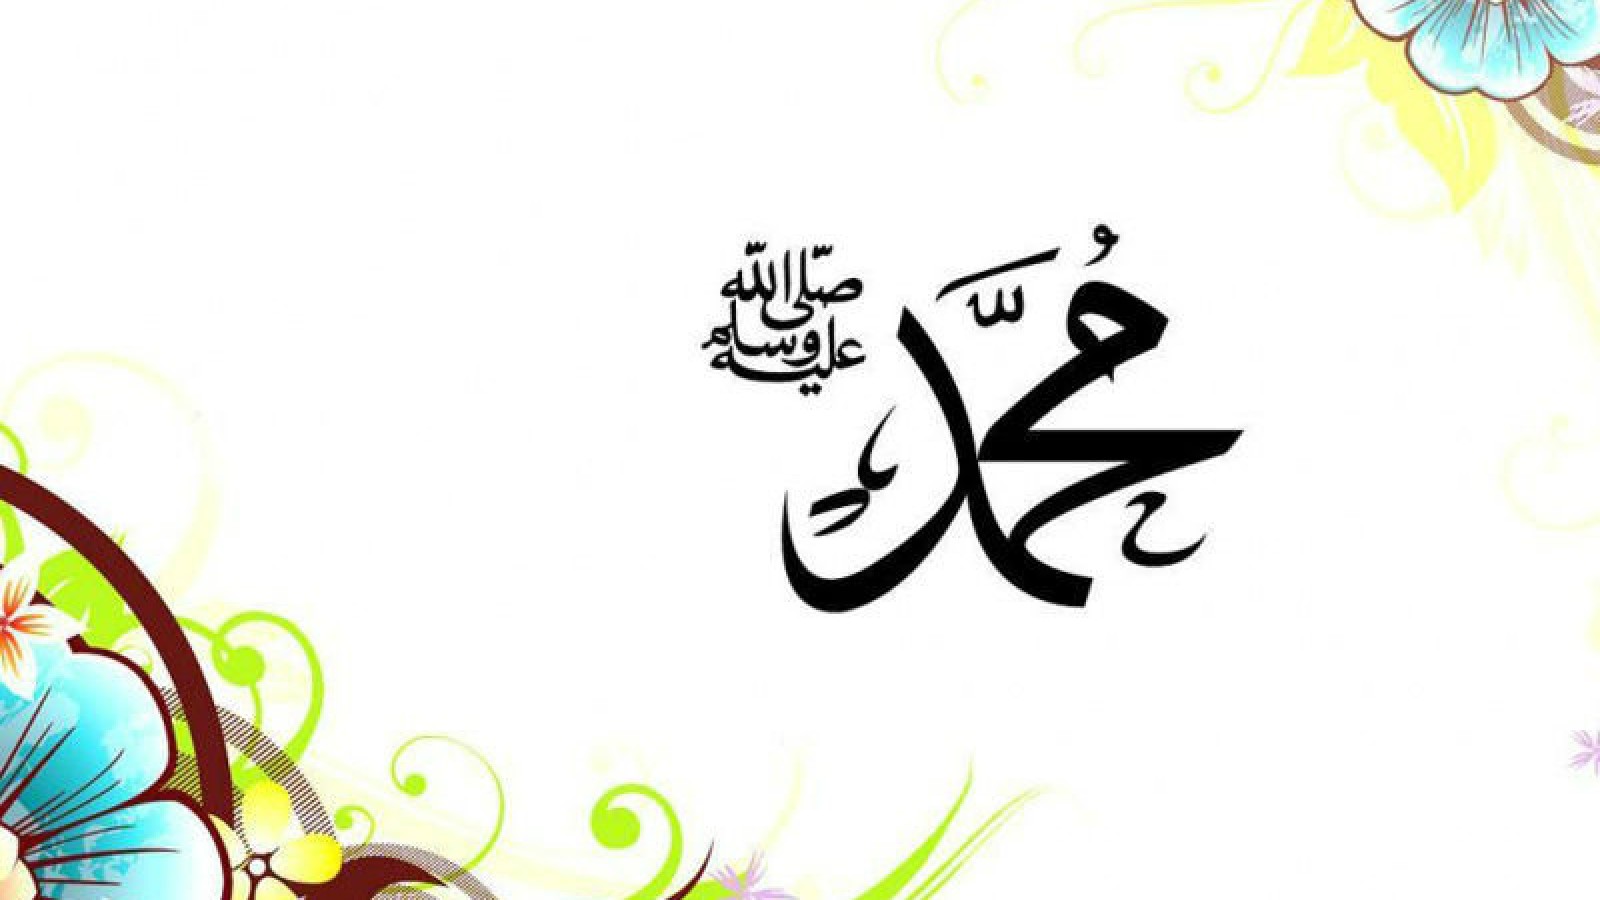 Prophet Muhammad S A W Names Image Most HD Wallpaper Pictures